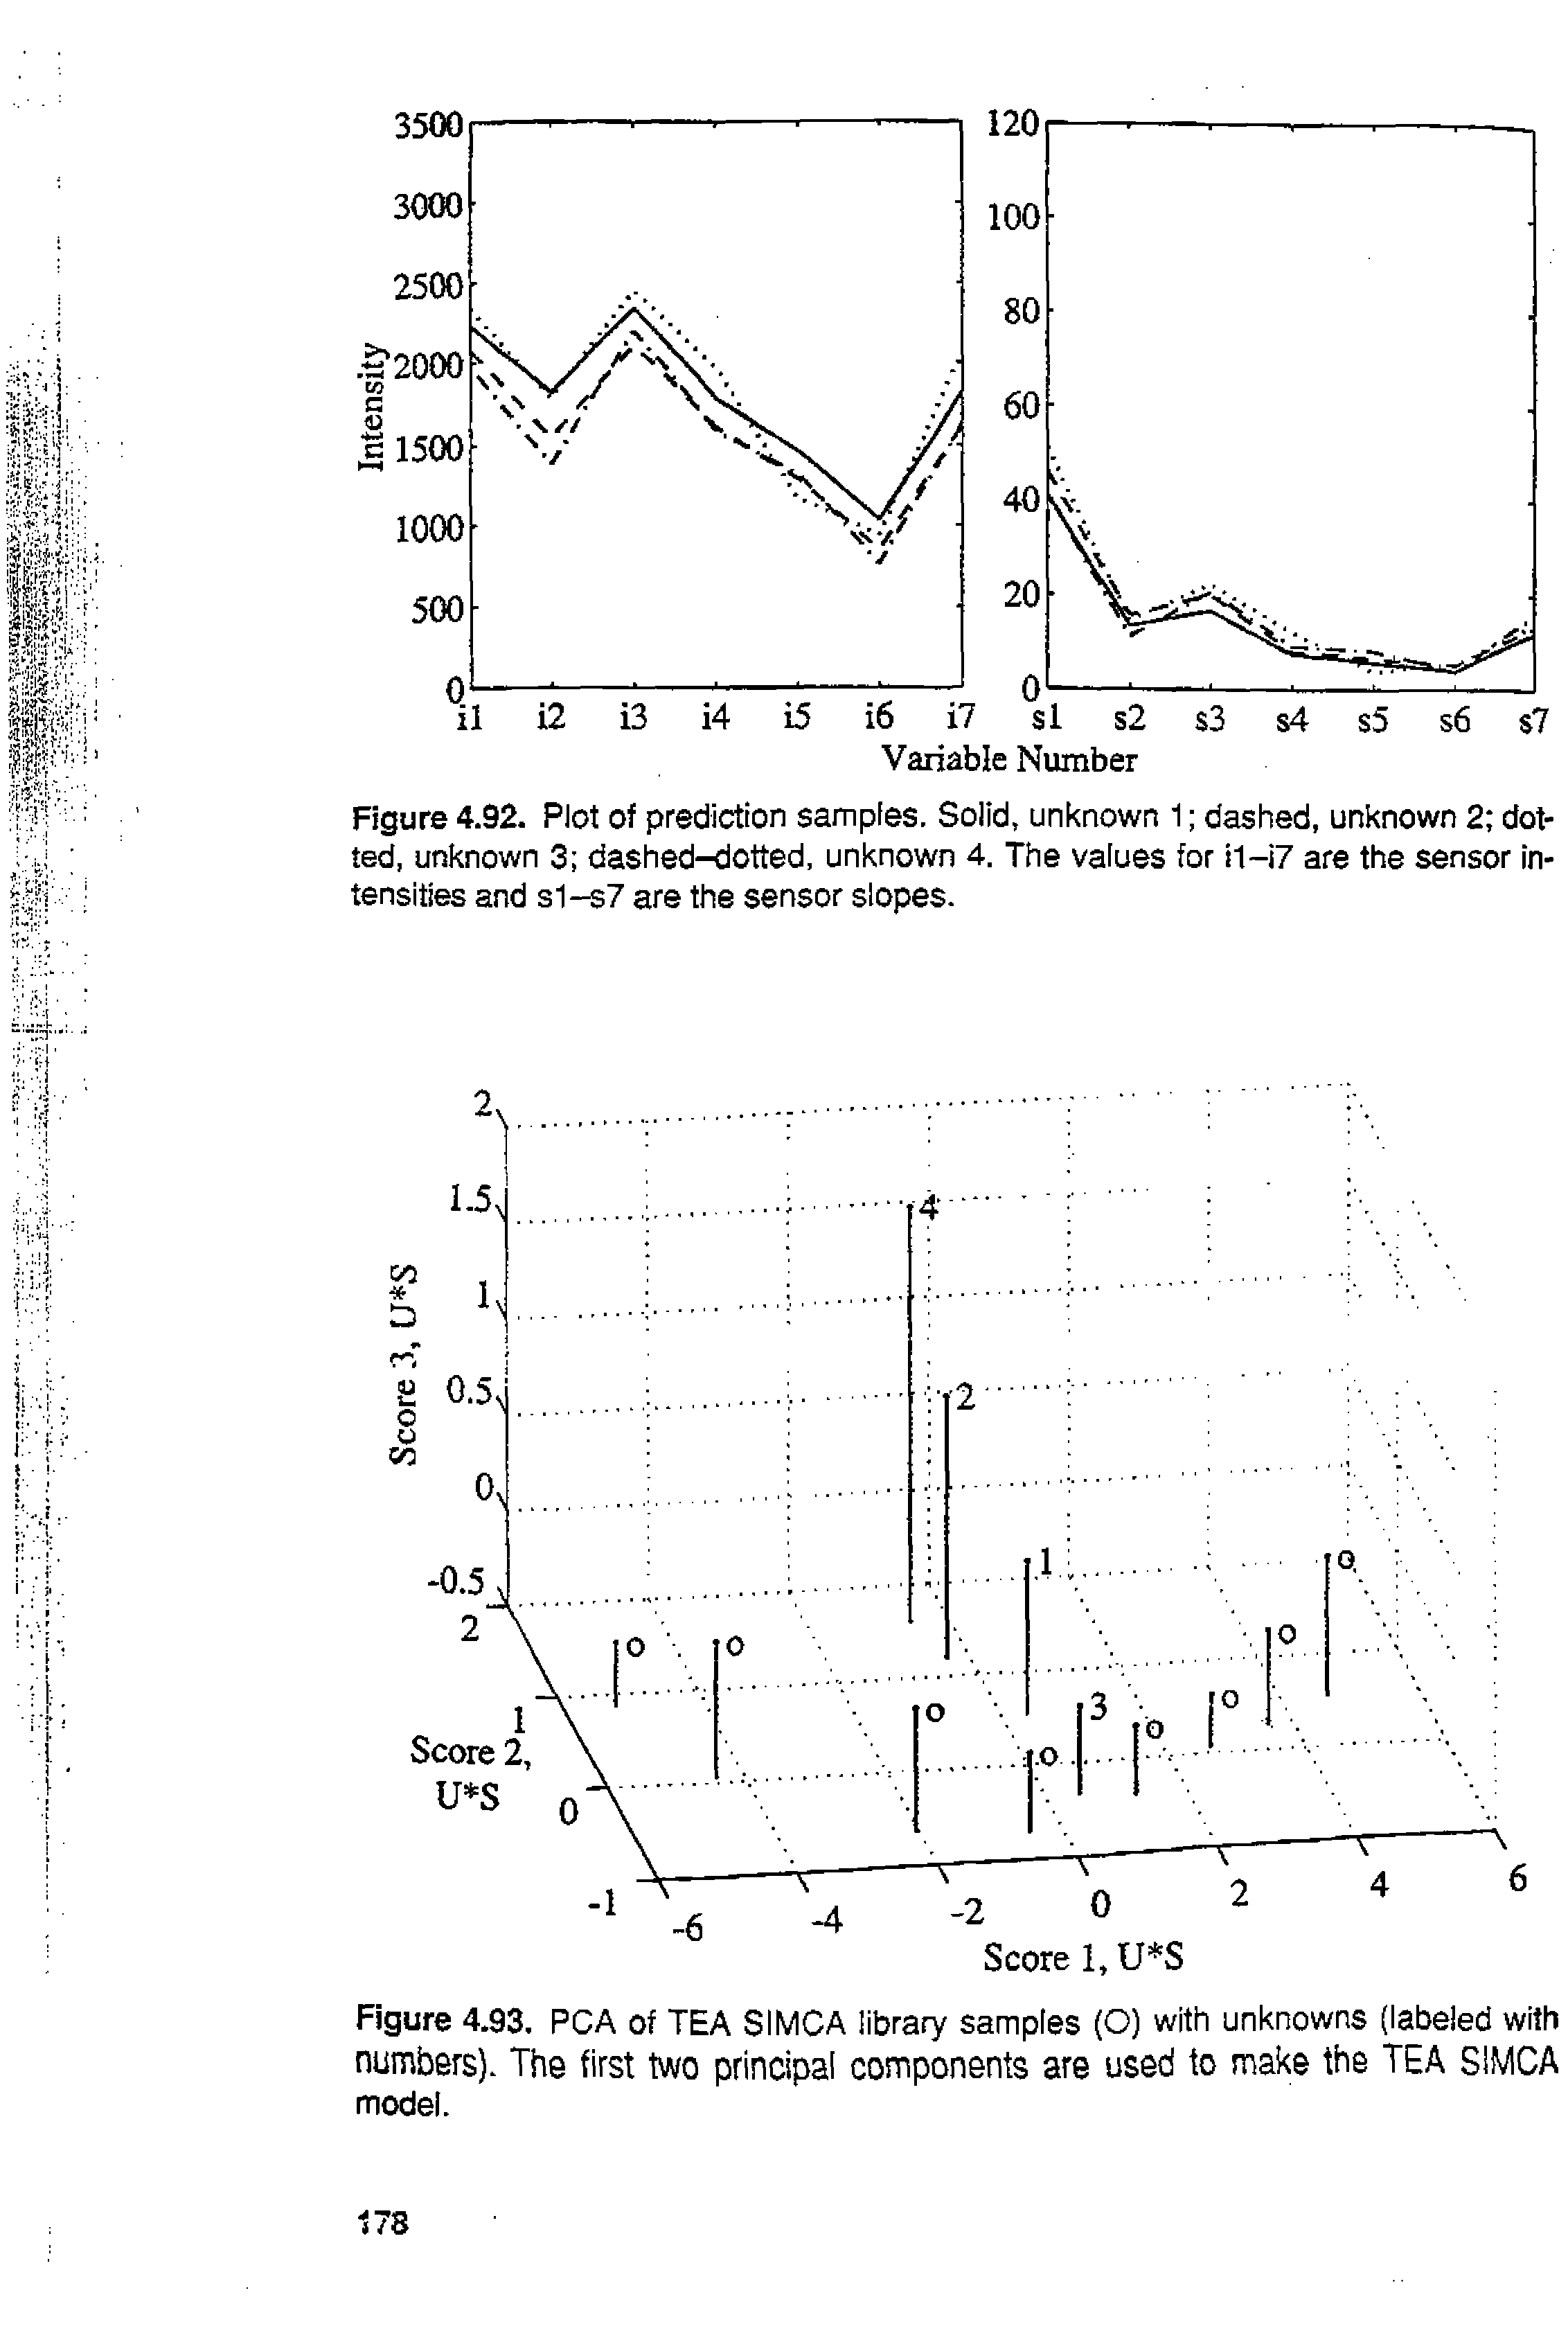 Figure 4.93. PCA of TEA SI MCA library samples (O) with unknowns (labeled with numbers). The first two principal components are used to make the TEA SIMCA model.